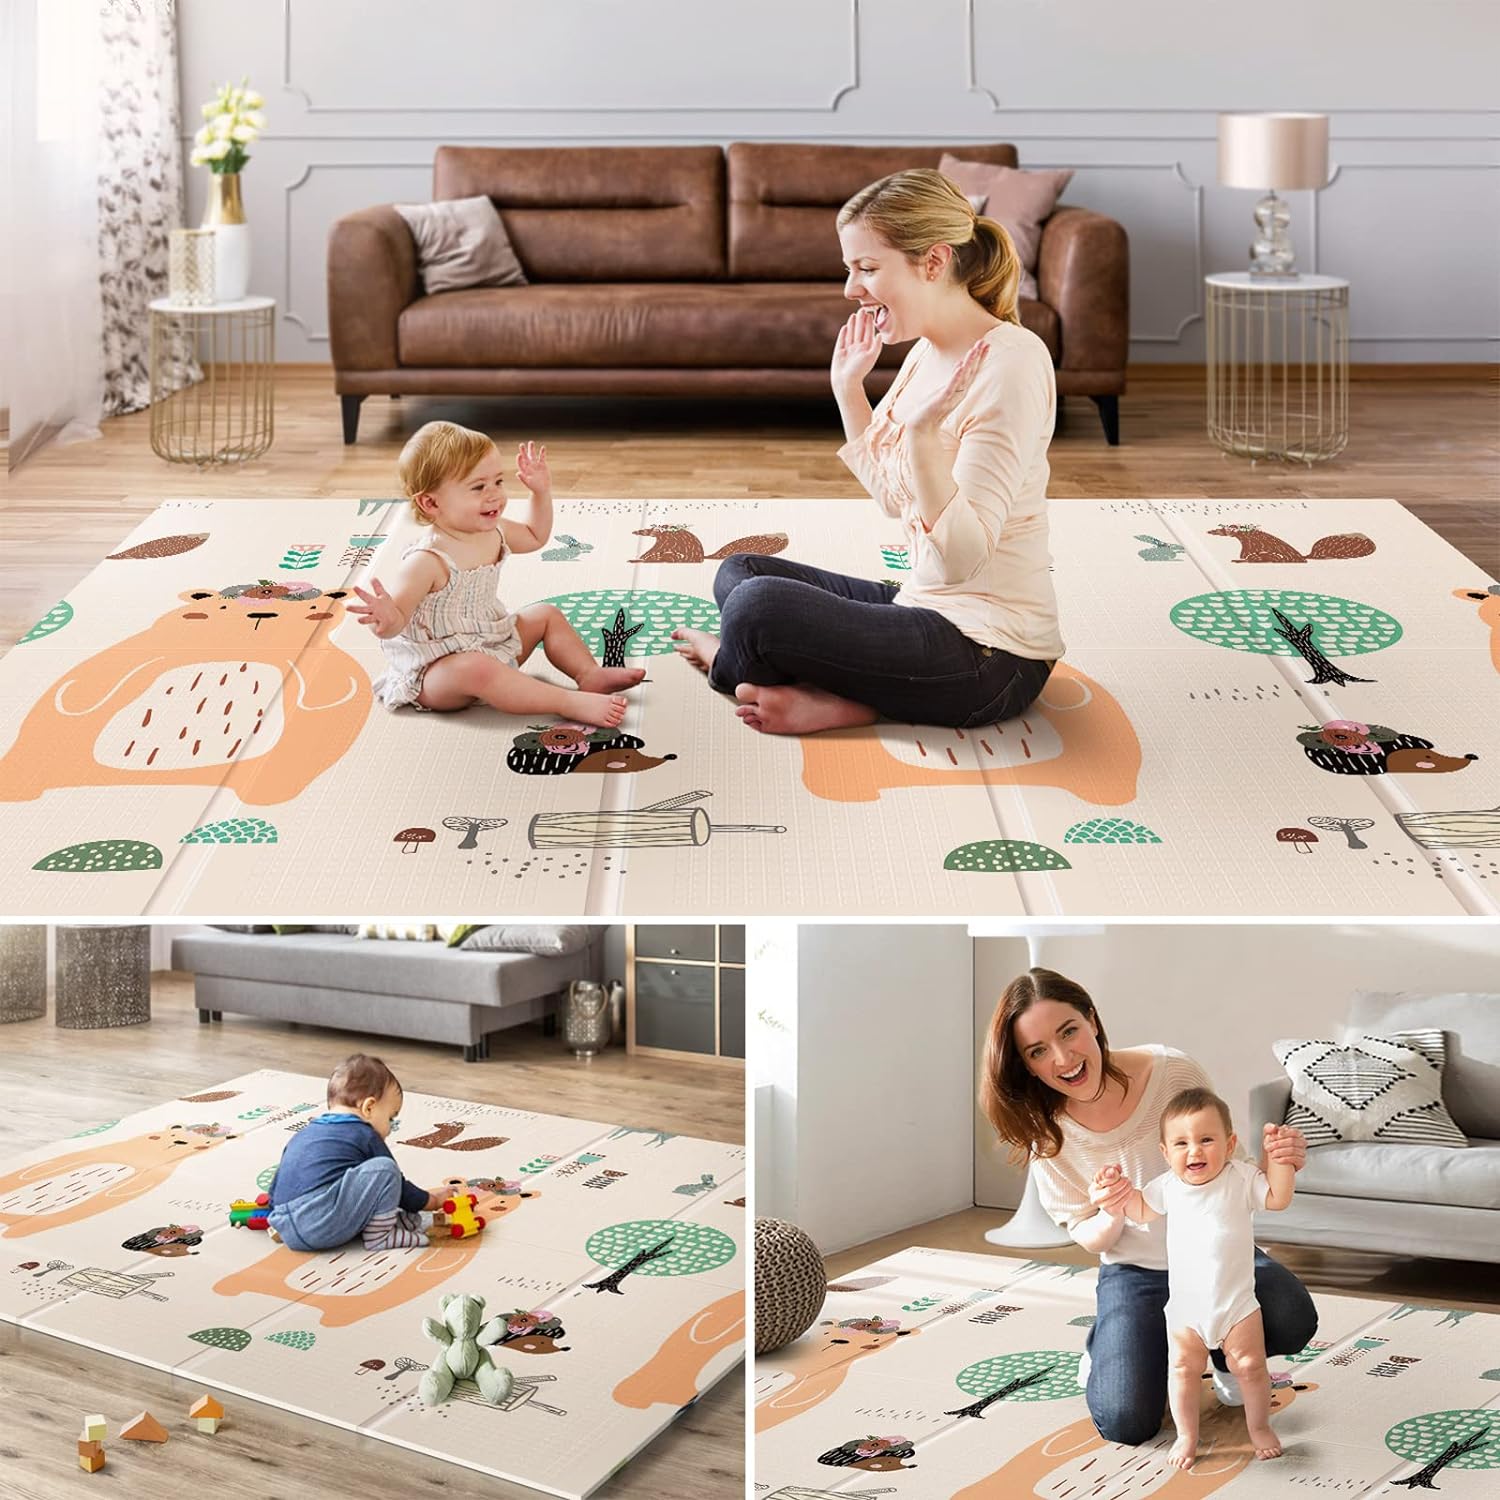 https://bigbigmart.com/wp-content/uploads/2023/11/UANLAUO-Foldable-Baby-Play-Mat-Extra-Large-Waterproof-Activity-Playmats-for-BabiesToddlers-Infants-Play-Tummy-Time-Foam-Baby-Mat-for-Floor-with-Travel-Bag-Bear71x59x0.4inch7.jpg